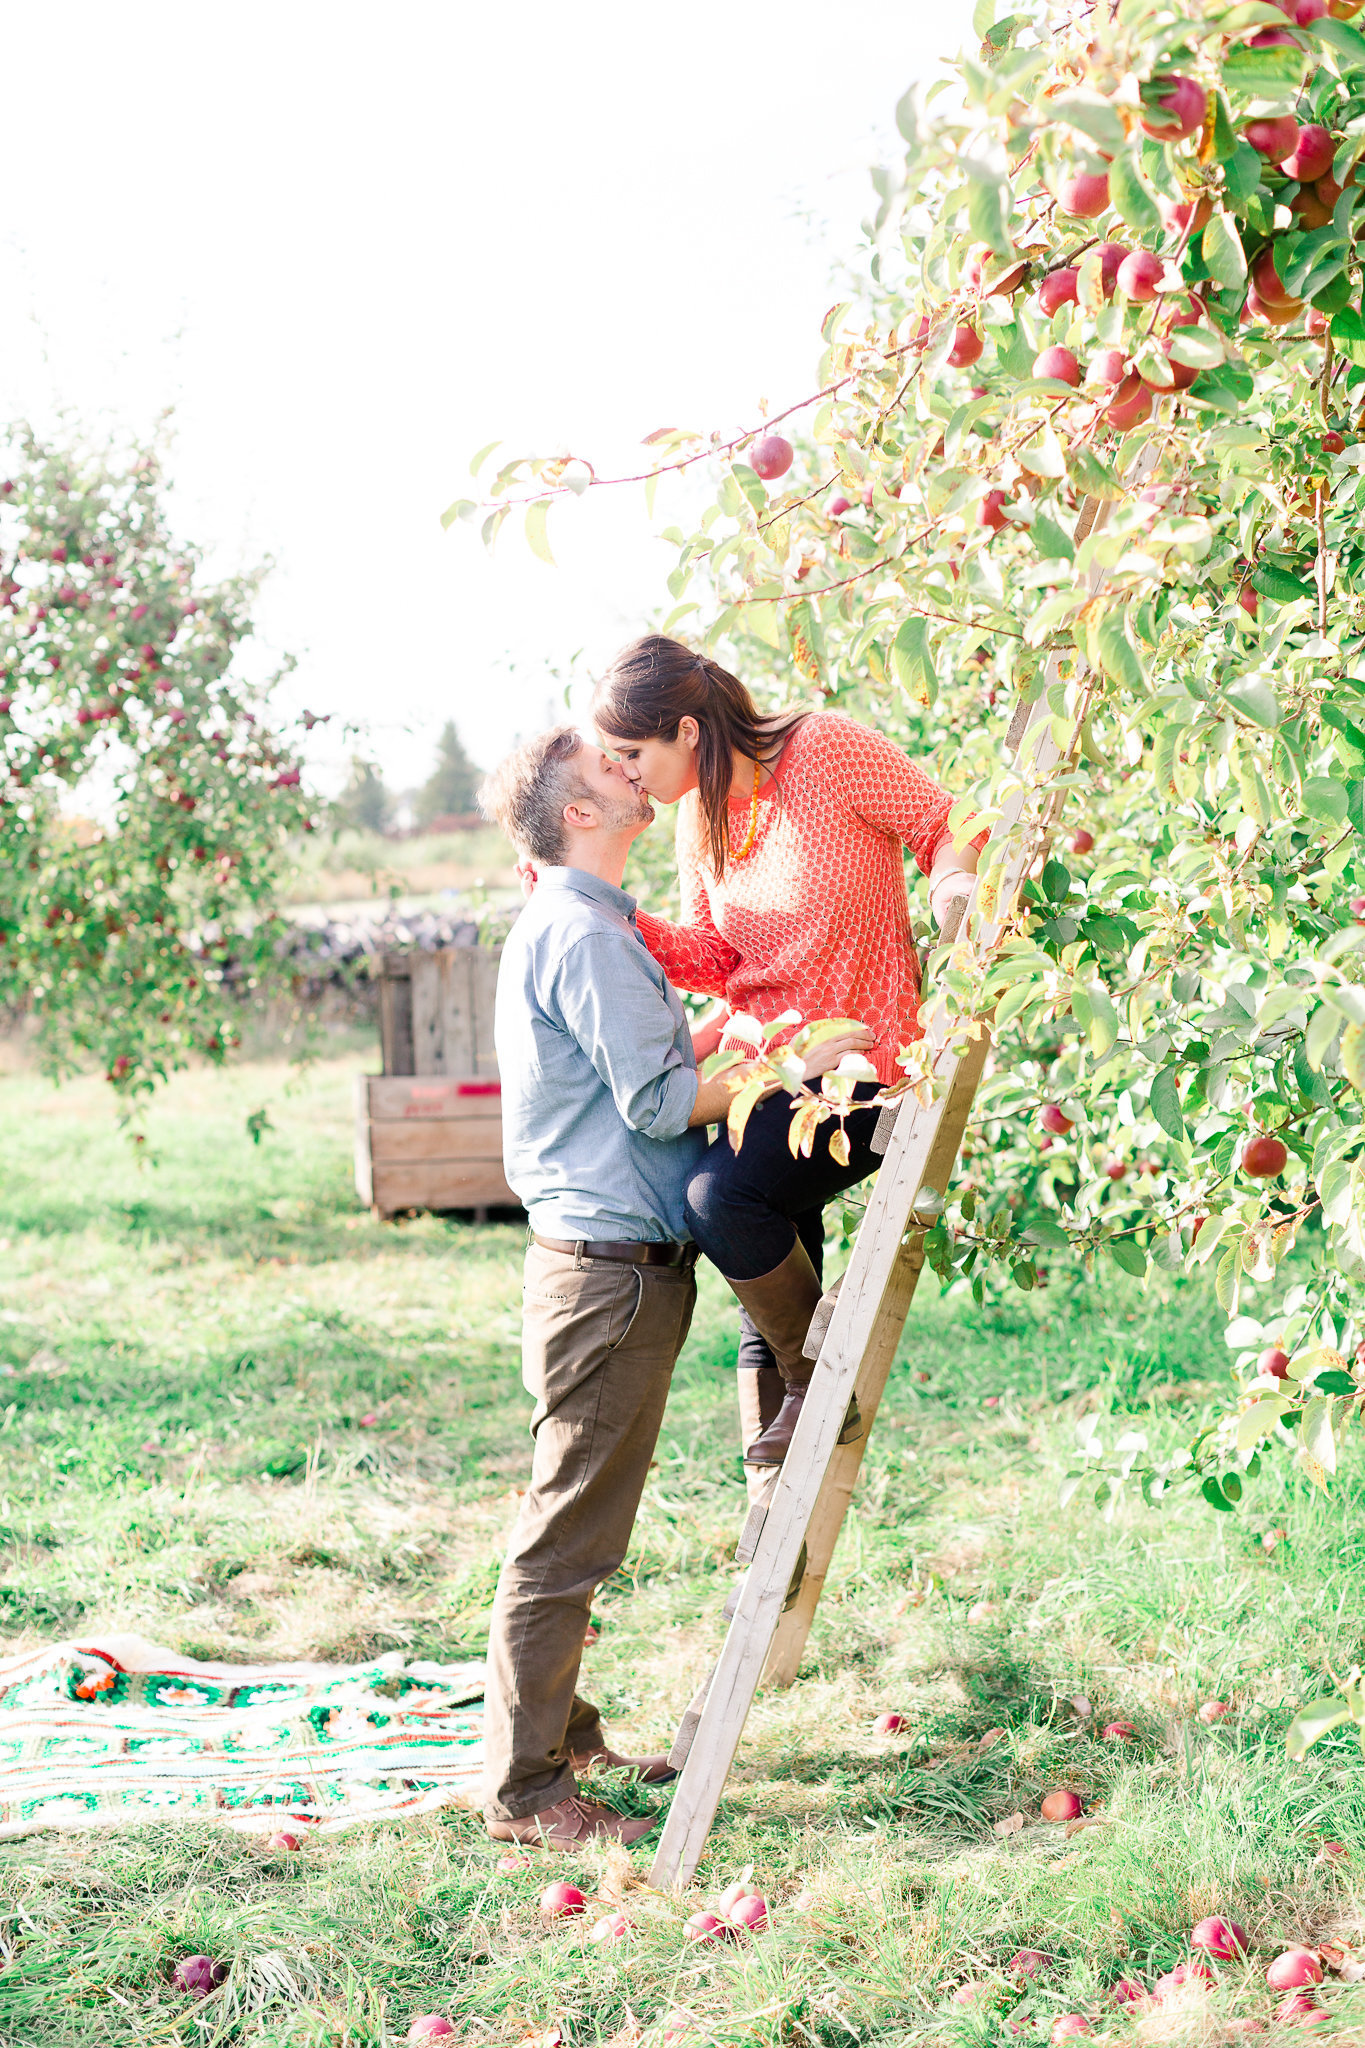 photographe-montreal-seance-fiancailles-verger-automne-lisa-renault-photographie-fall-orchard-engagement-session-11